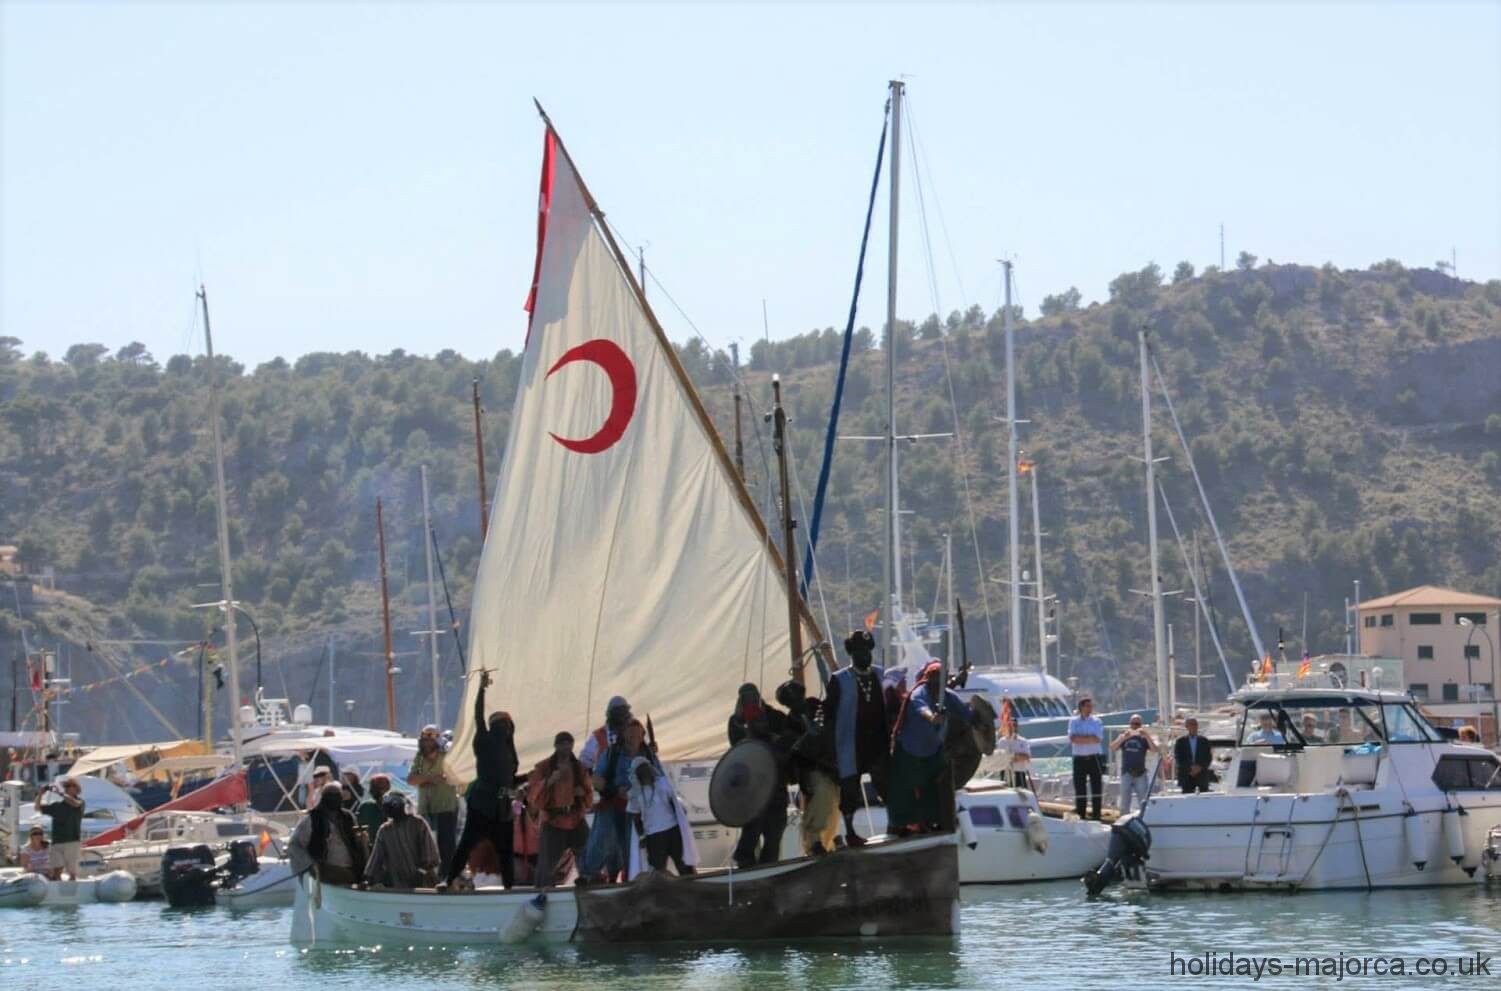 Moors sailing into port at the Christians vs Moors festival in Soller Majorca